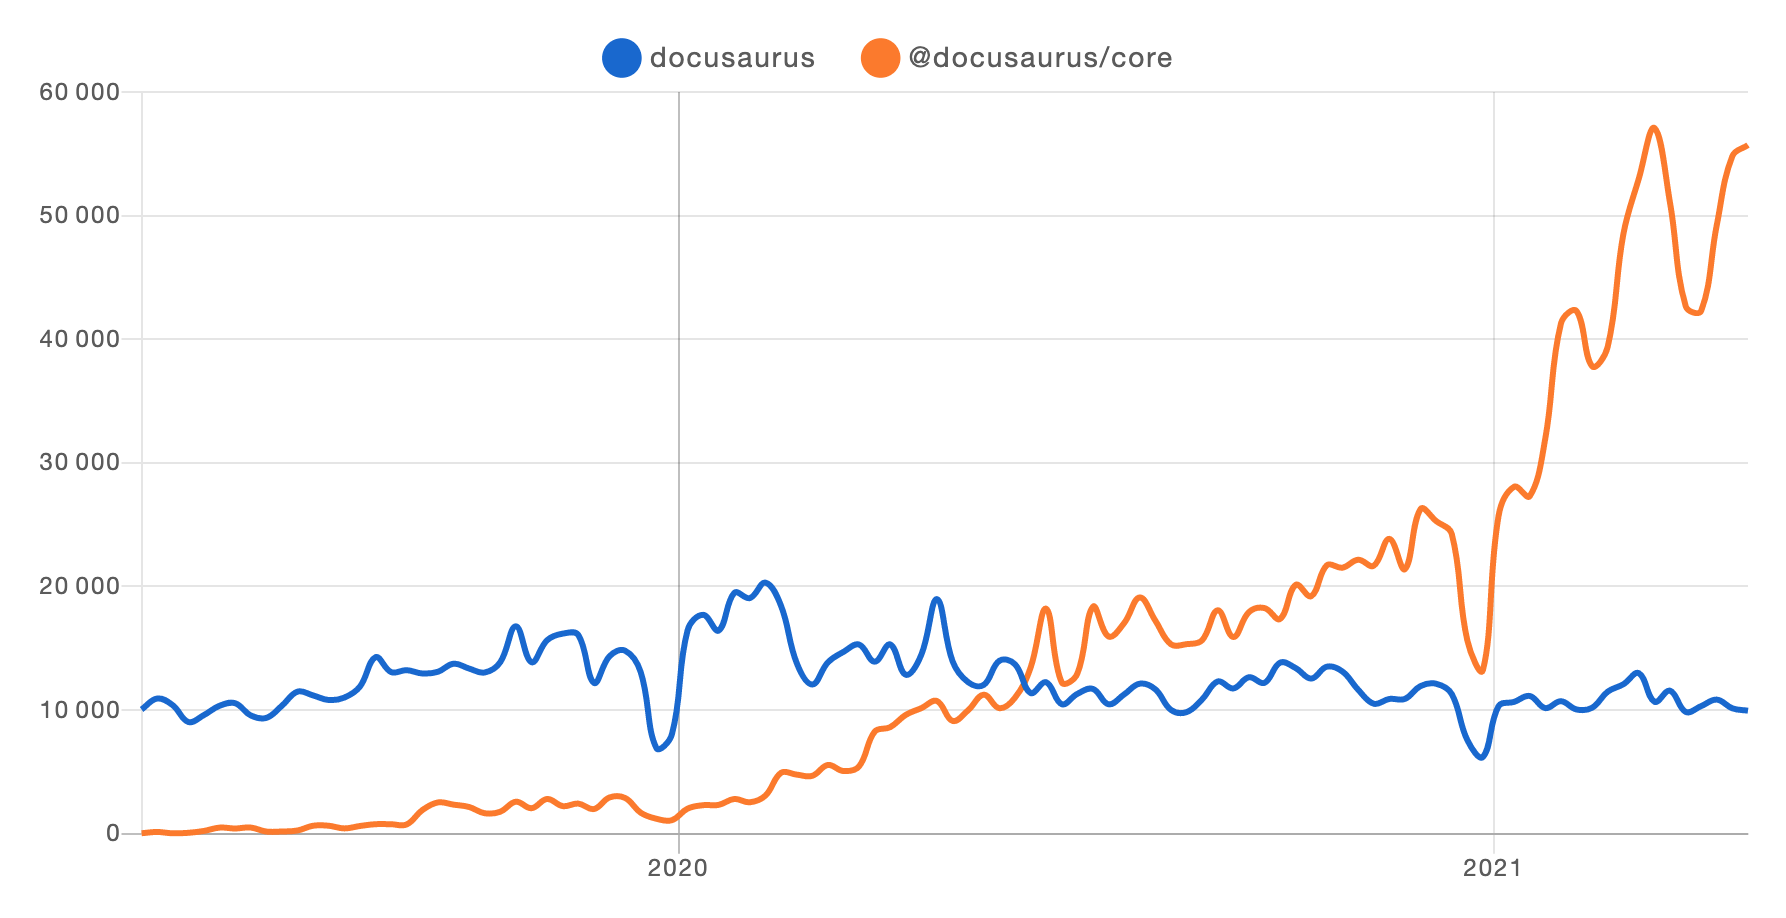 Docusaurus v1 vs. v2 npm trends from 2019 to mid 2021. The installations of Docusaurus v2 is sharply rising, while v1 is mostly stable. V1 fluctuates between 10000 and 20000, while v2 starts at 0 and ends at almost 60000. The intersection happens around June 2020.